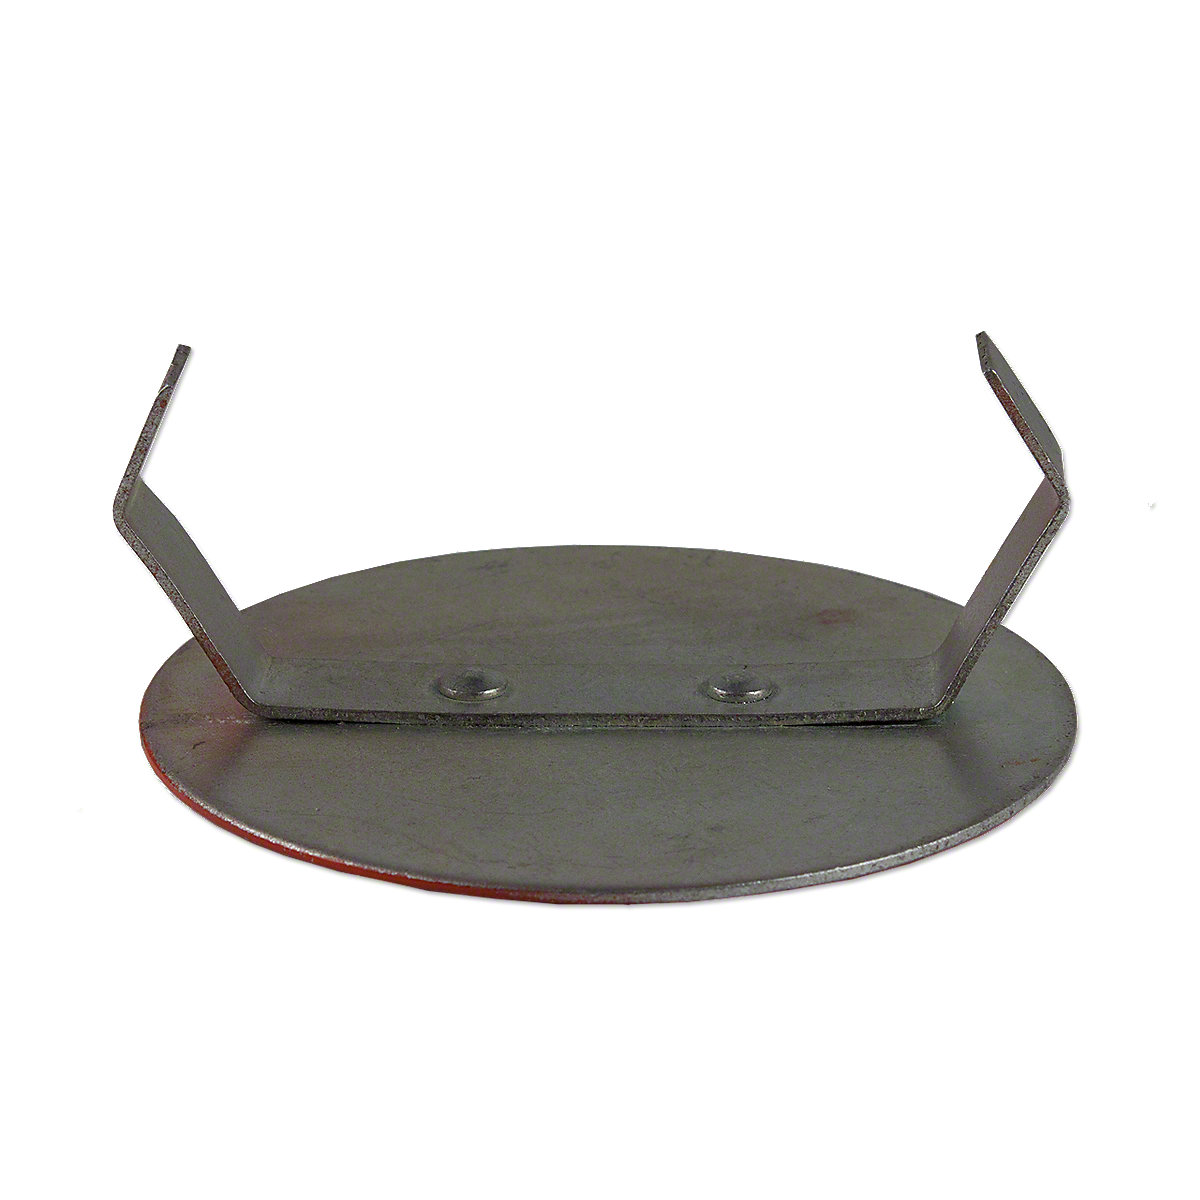 Clutch Inspection Cover Plate With Spring Steele Clips For Allis Chalmers: D14, D15.